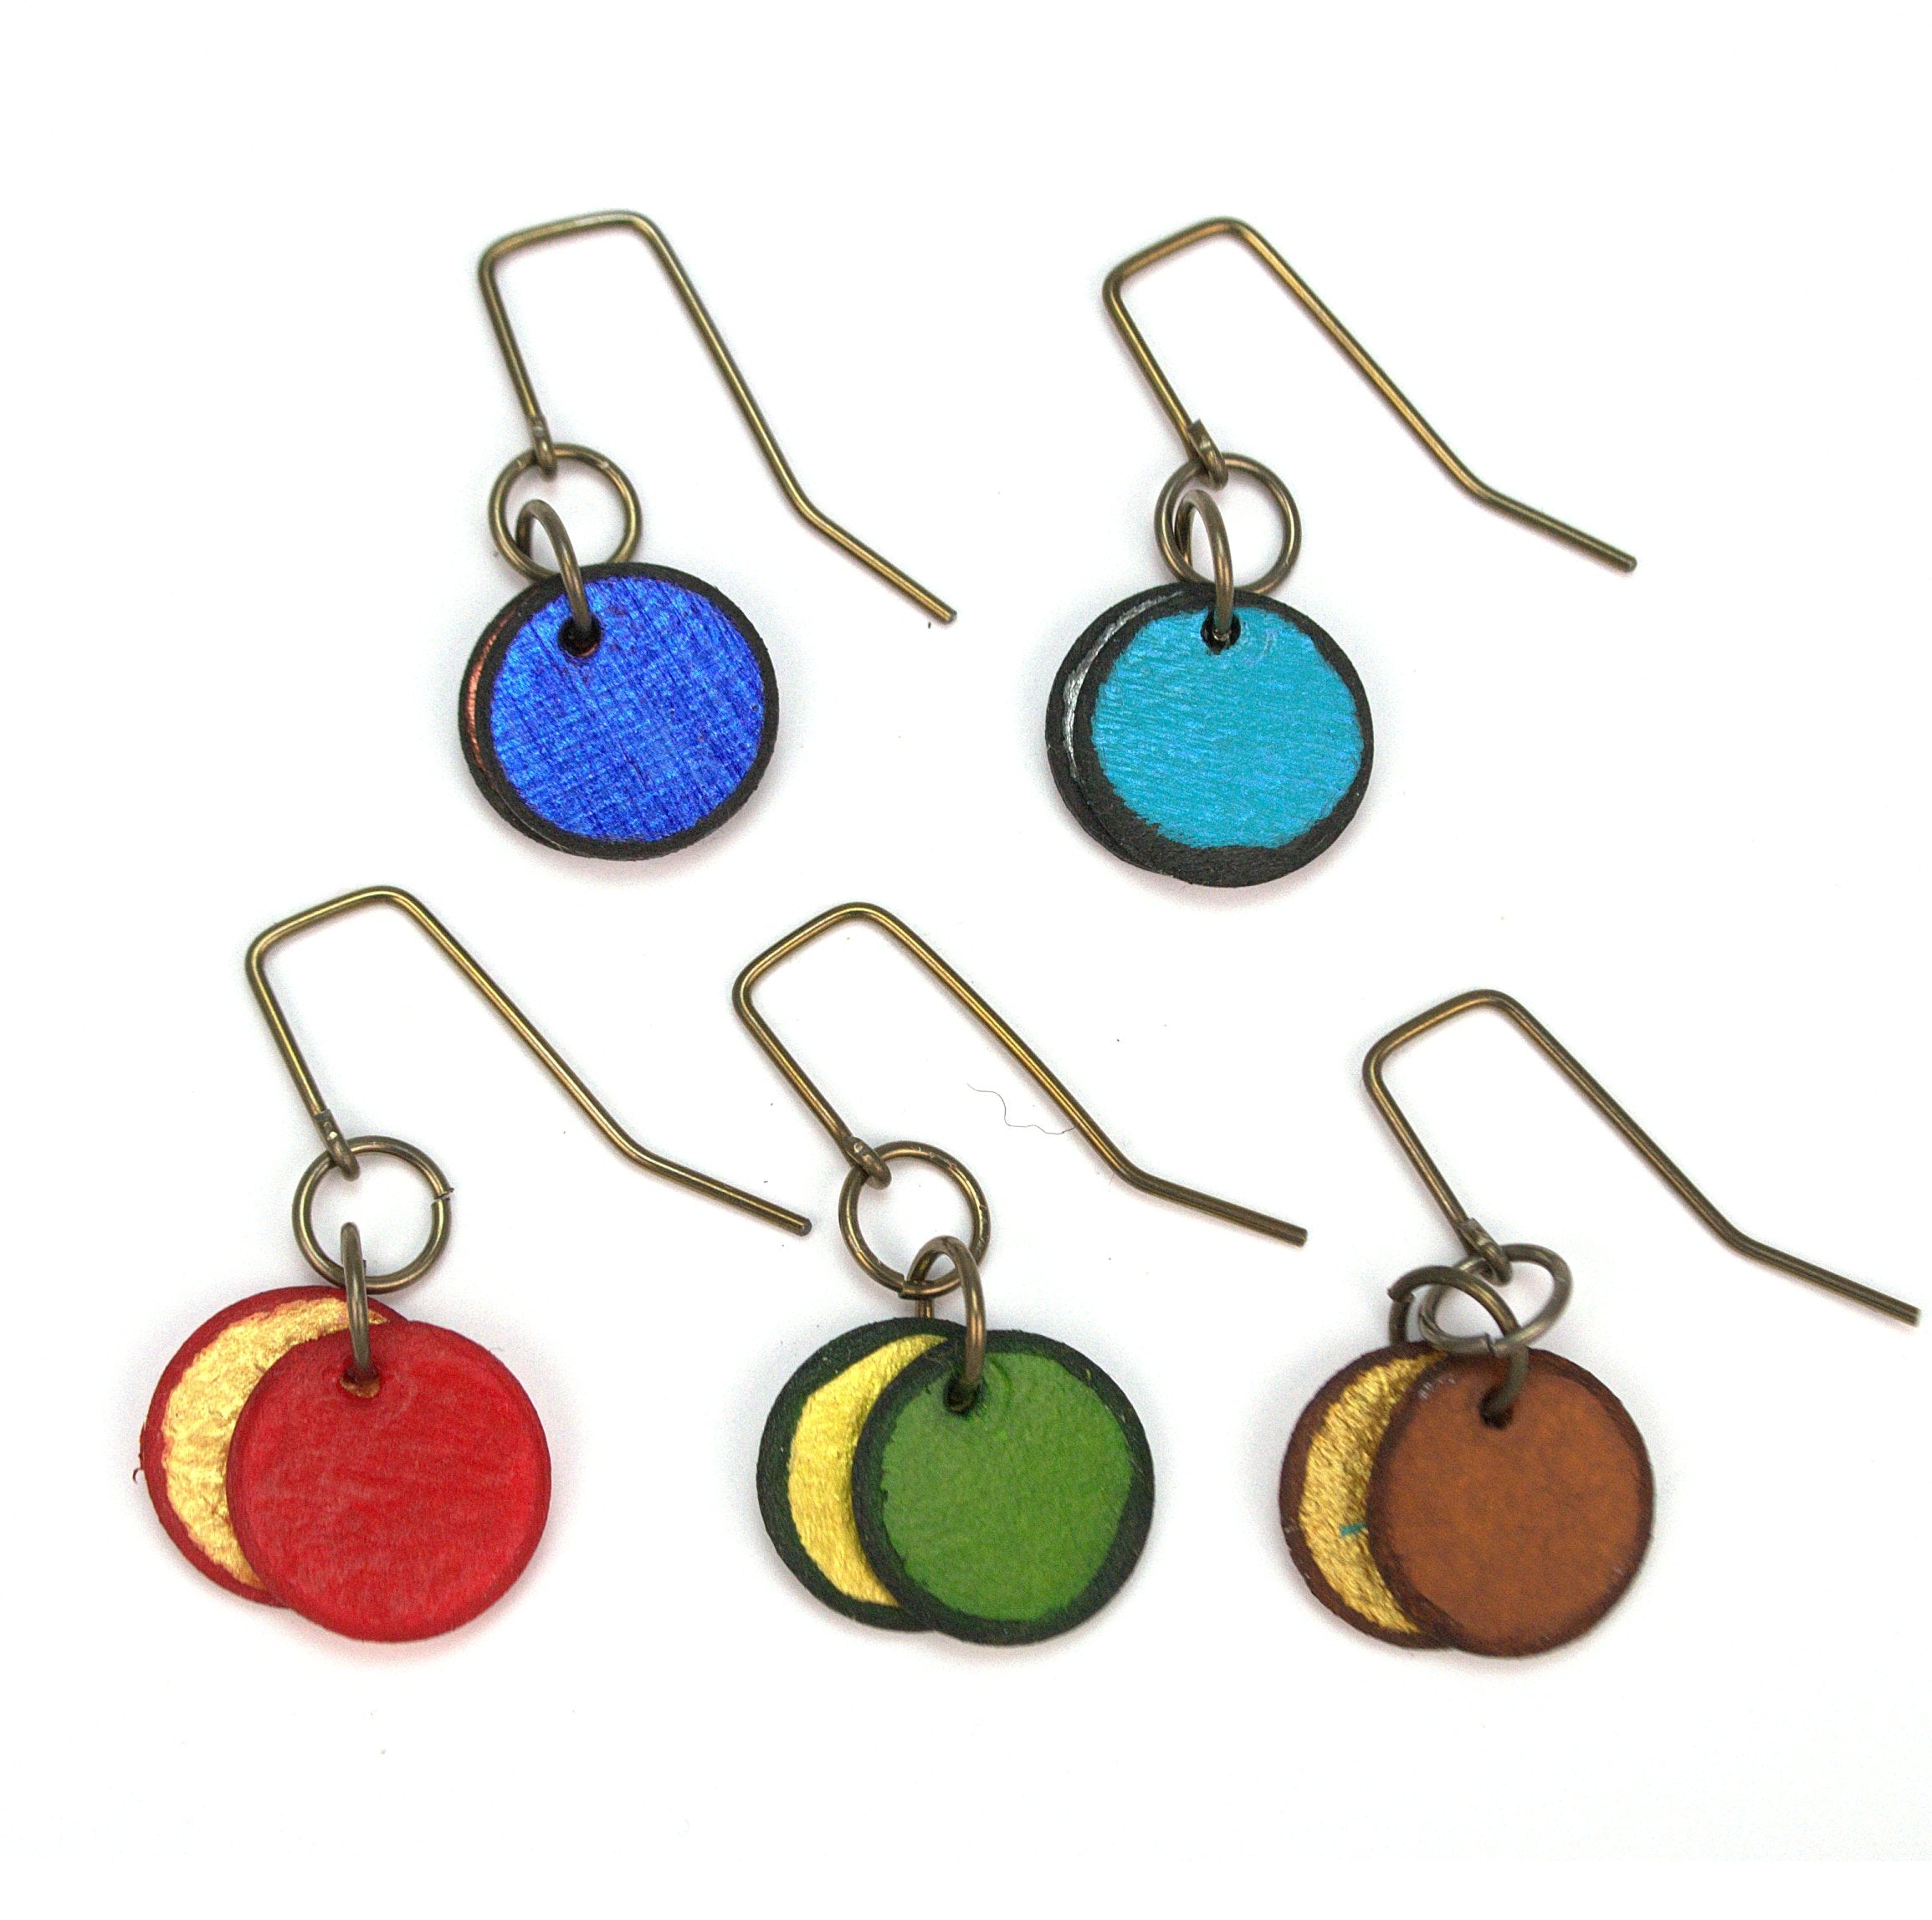 Mini Swingers earrings, circle shape, colors red blue turquoise emerald and brown, made from rawhide